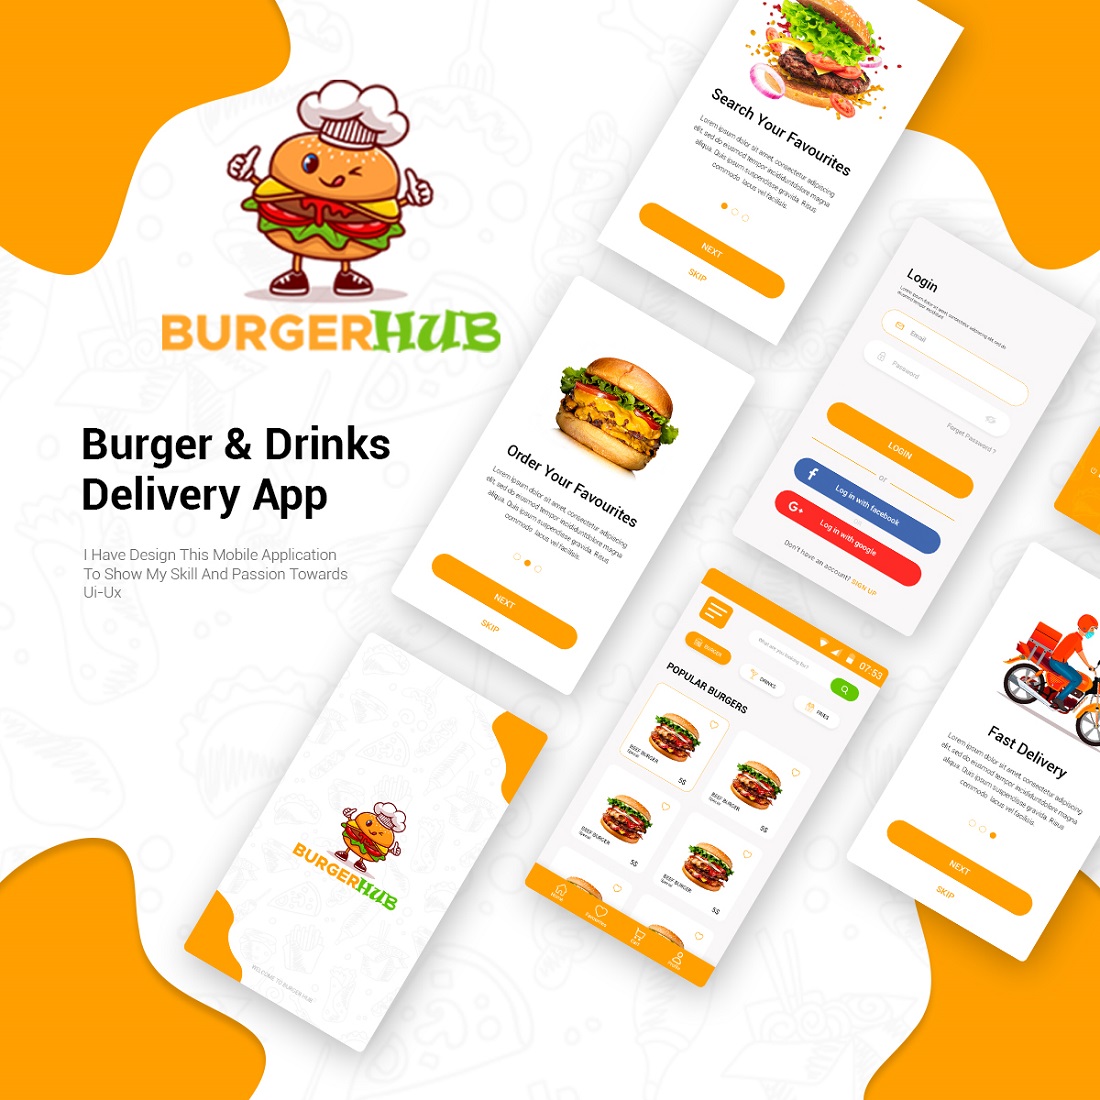 Food Delivery Mobile App UI Template cover image.